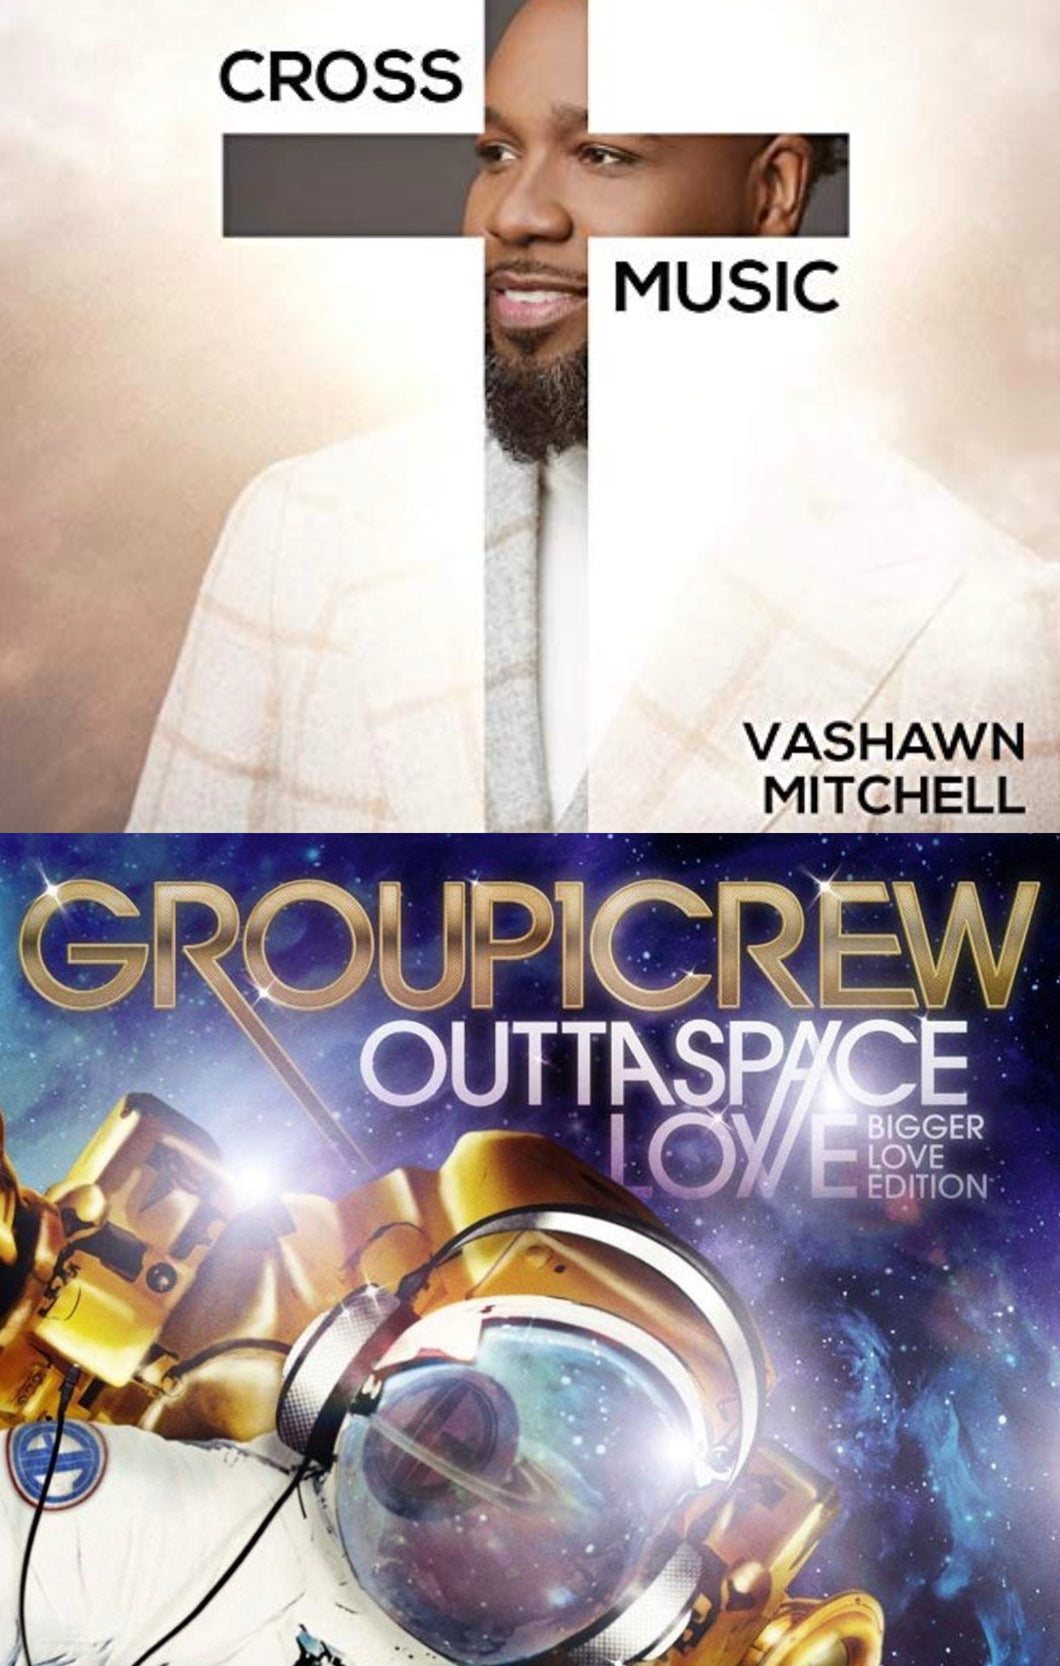 VaShawn Mitchell Cross Music EP + Group 1 Crew Outta Space Love 2CD